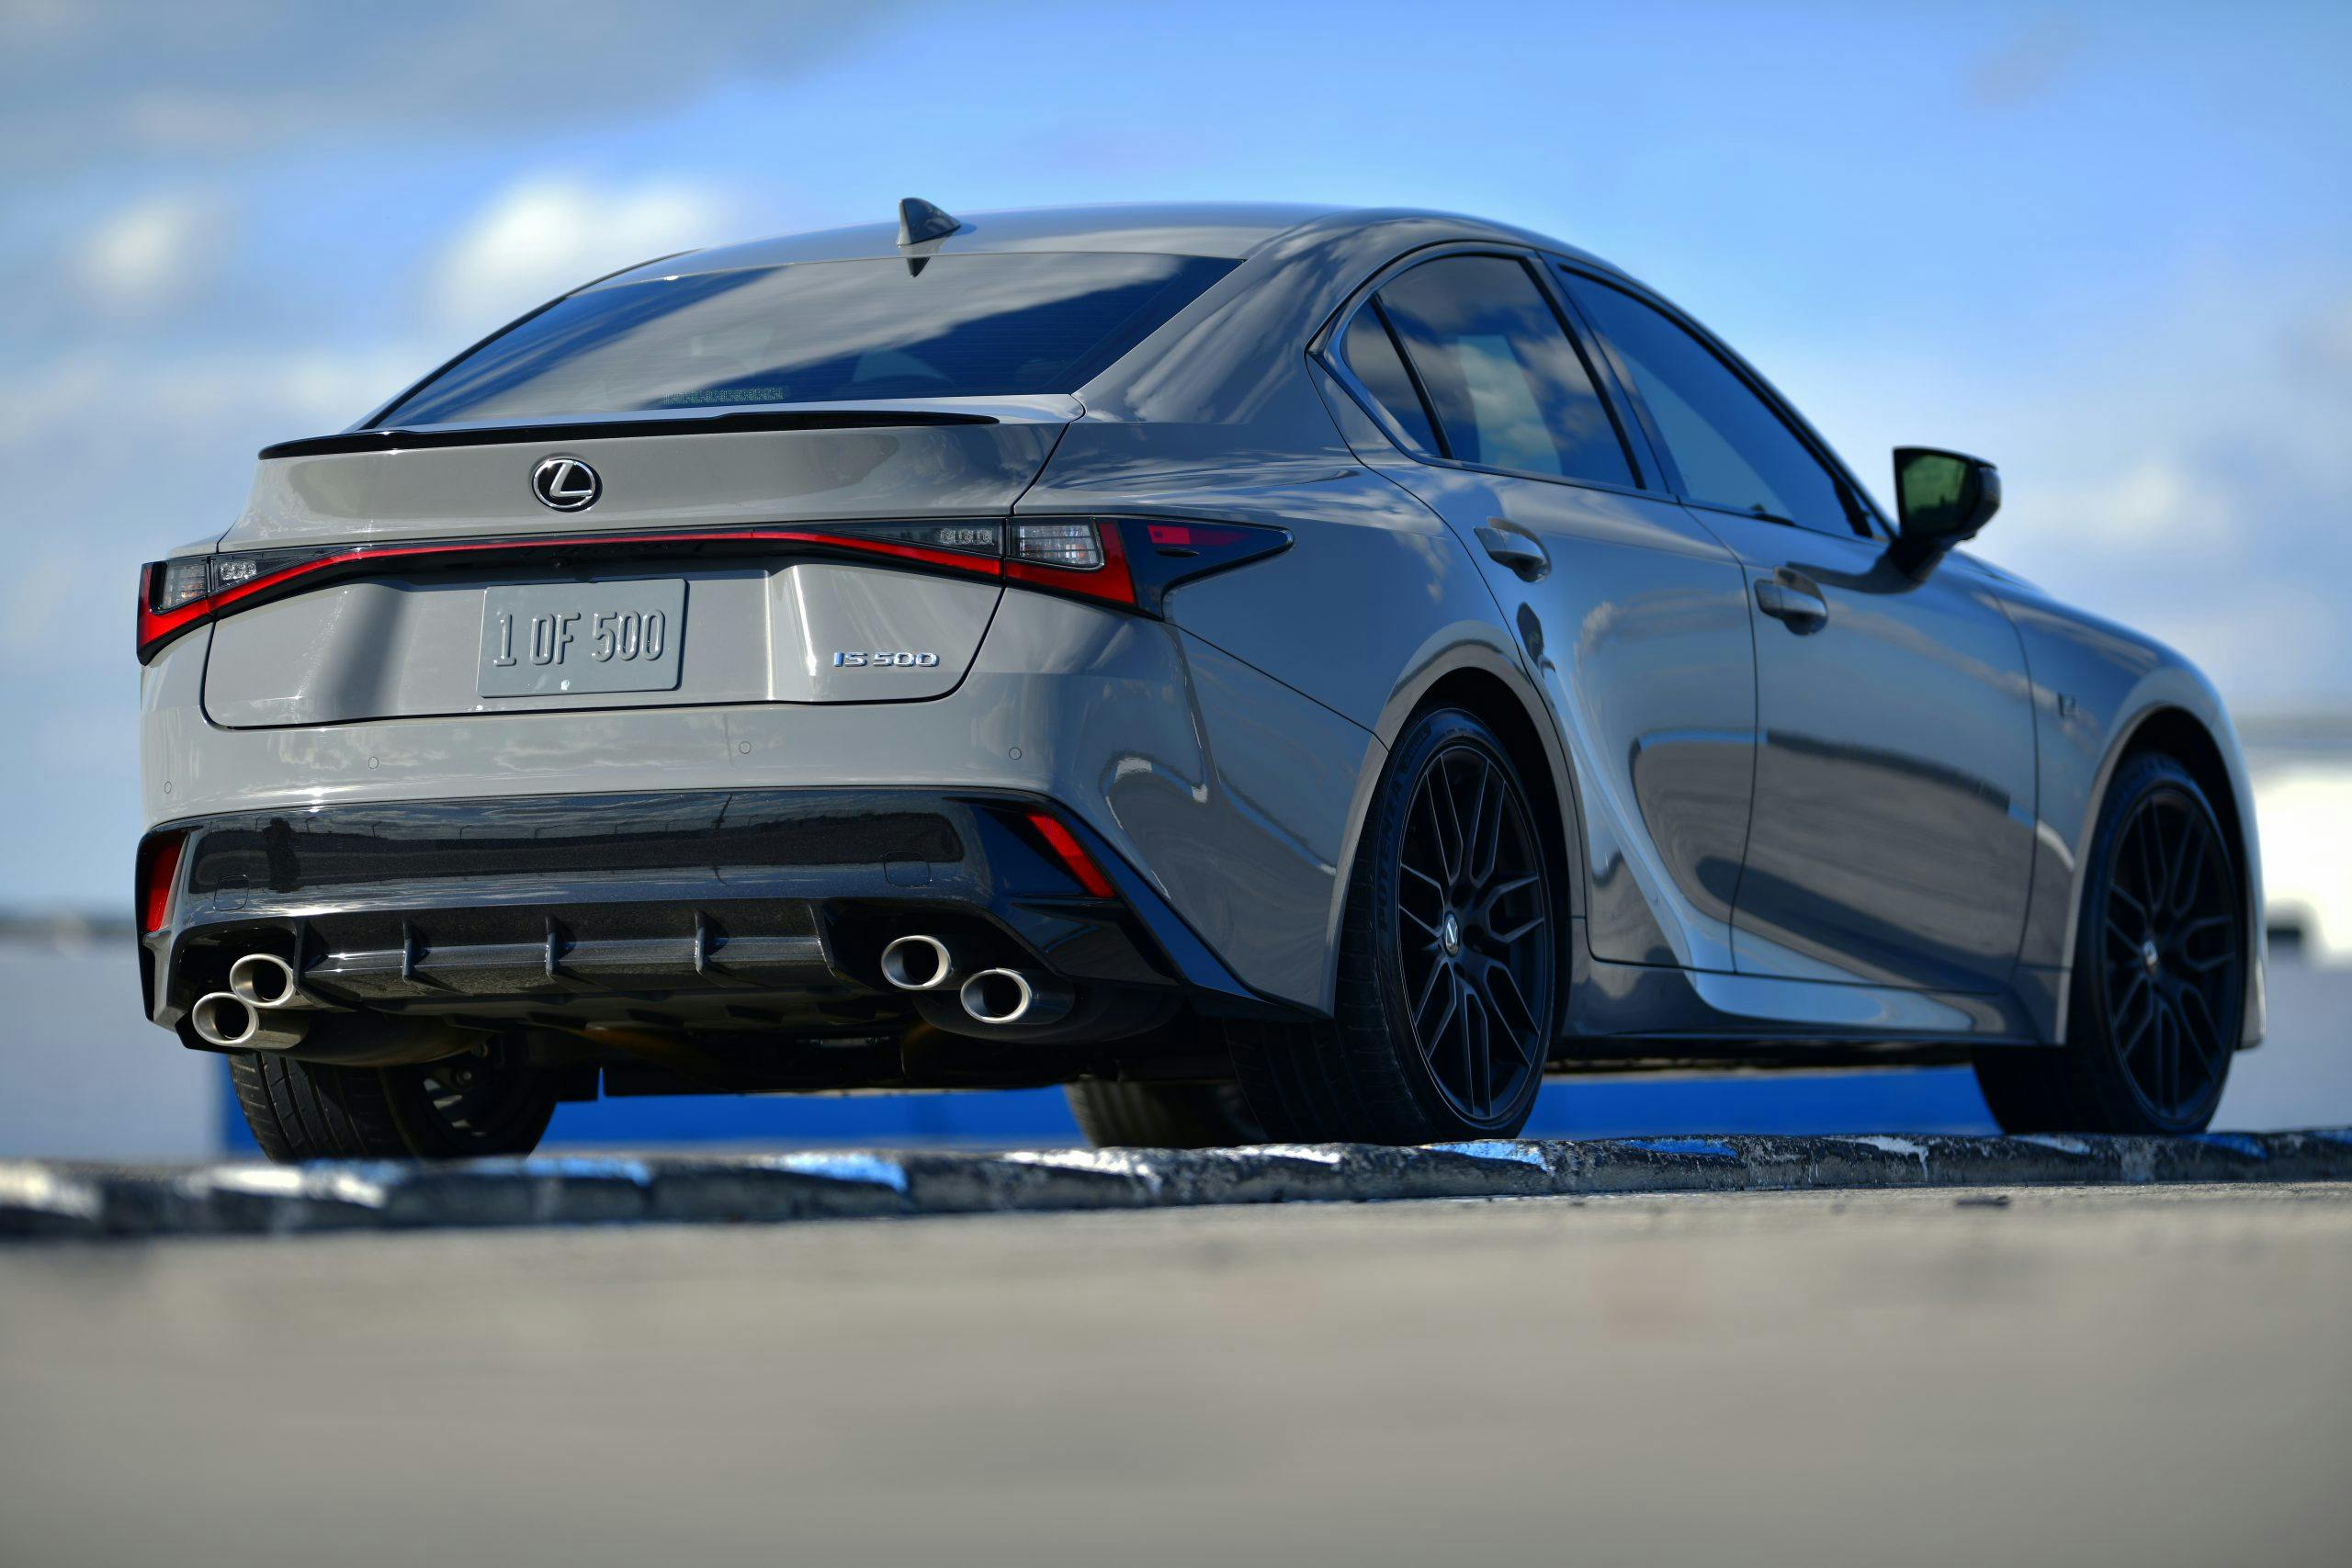 Lexus IS 500 F Sport Performance whets V8 appetites with limitedrun